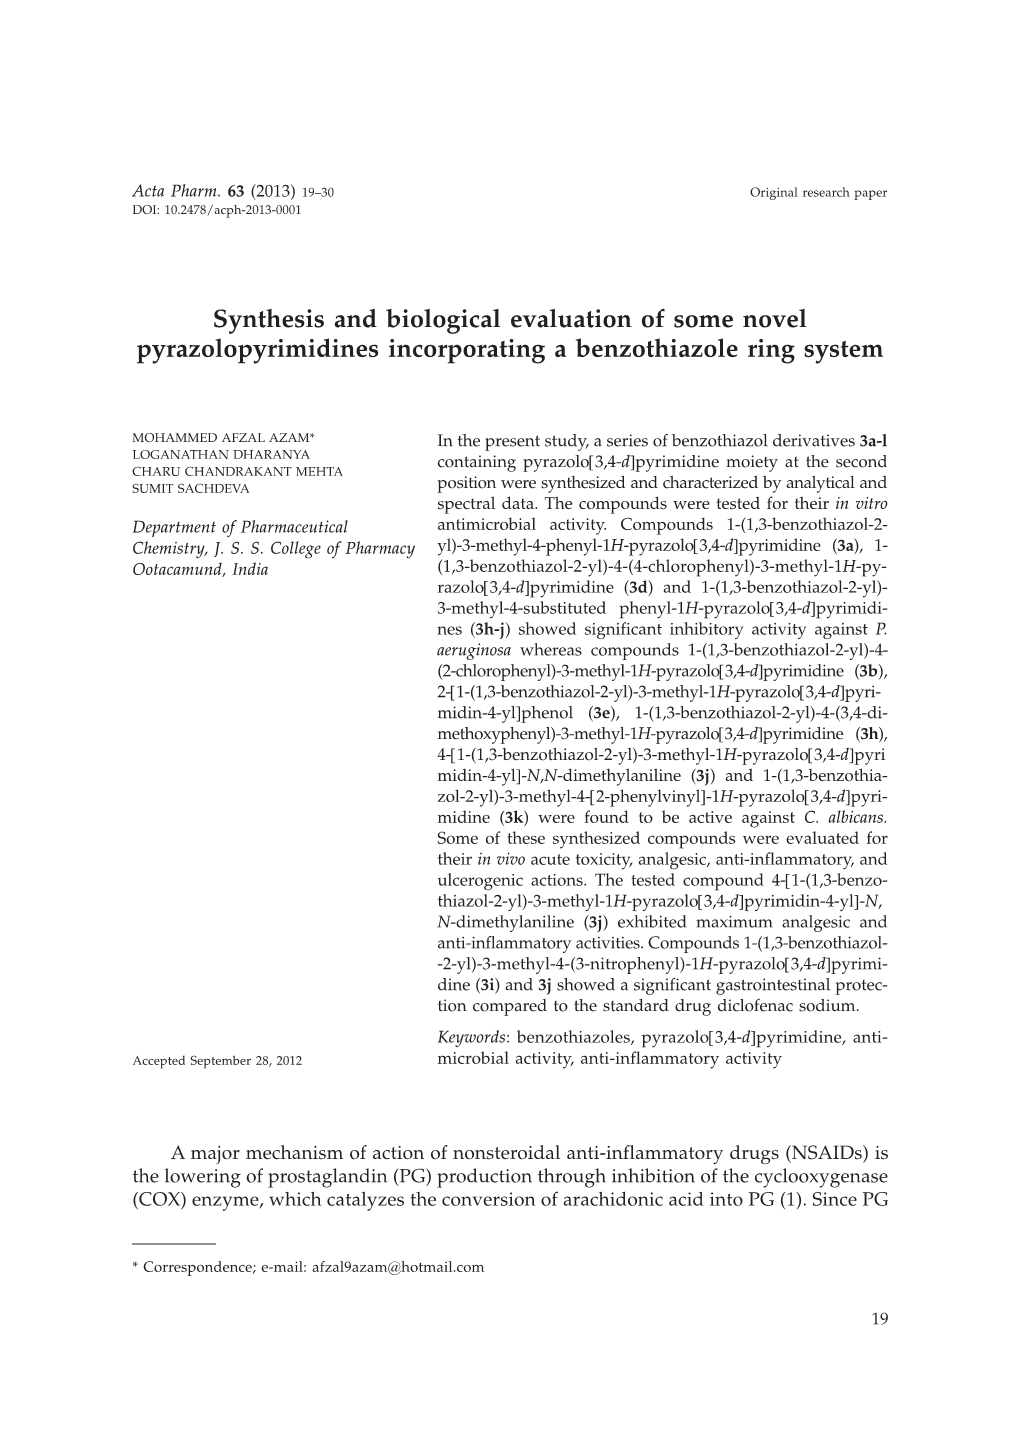 Synthesis and Biological Evaluation of Some Novel Pyrazolopyrimidines Incorporating a Benzothiazole Ring System